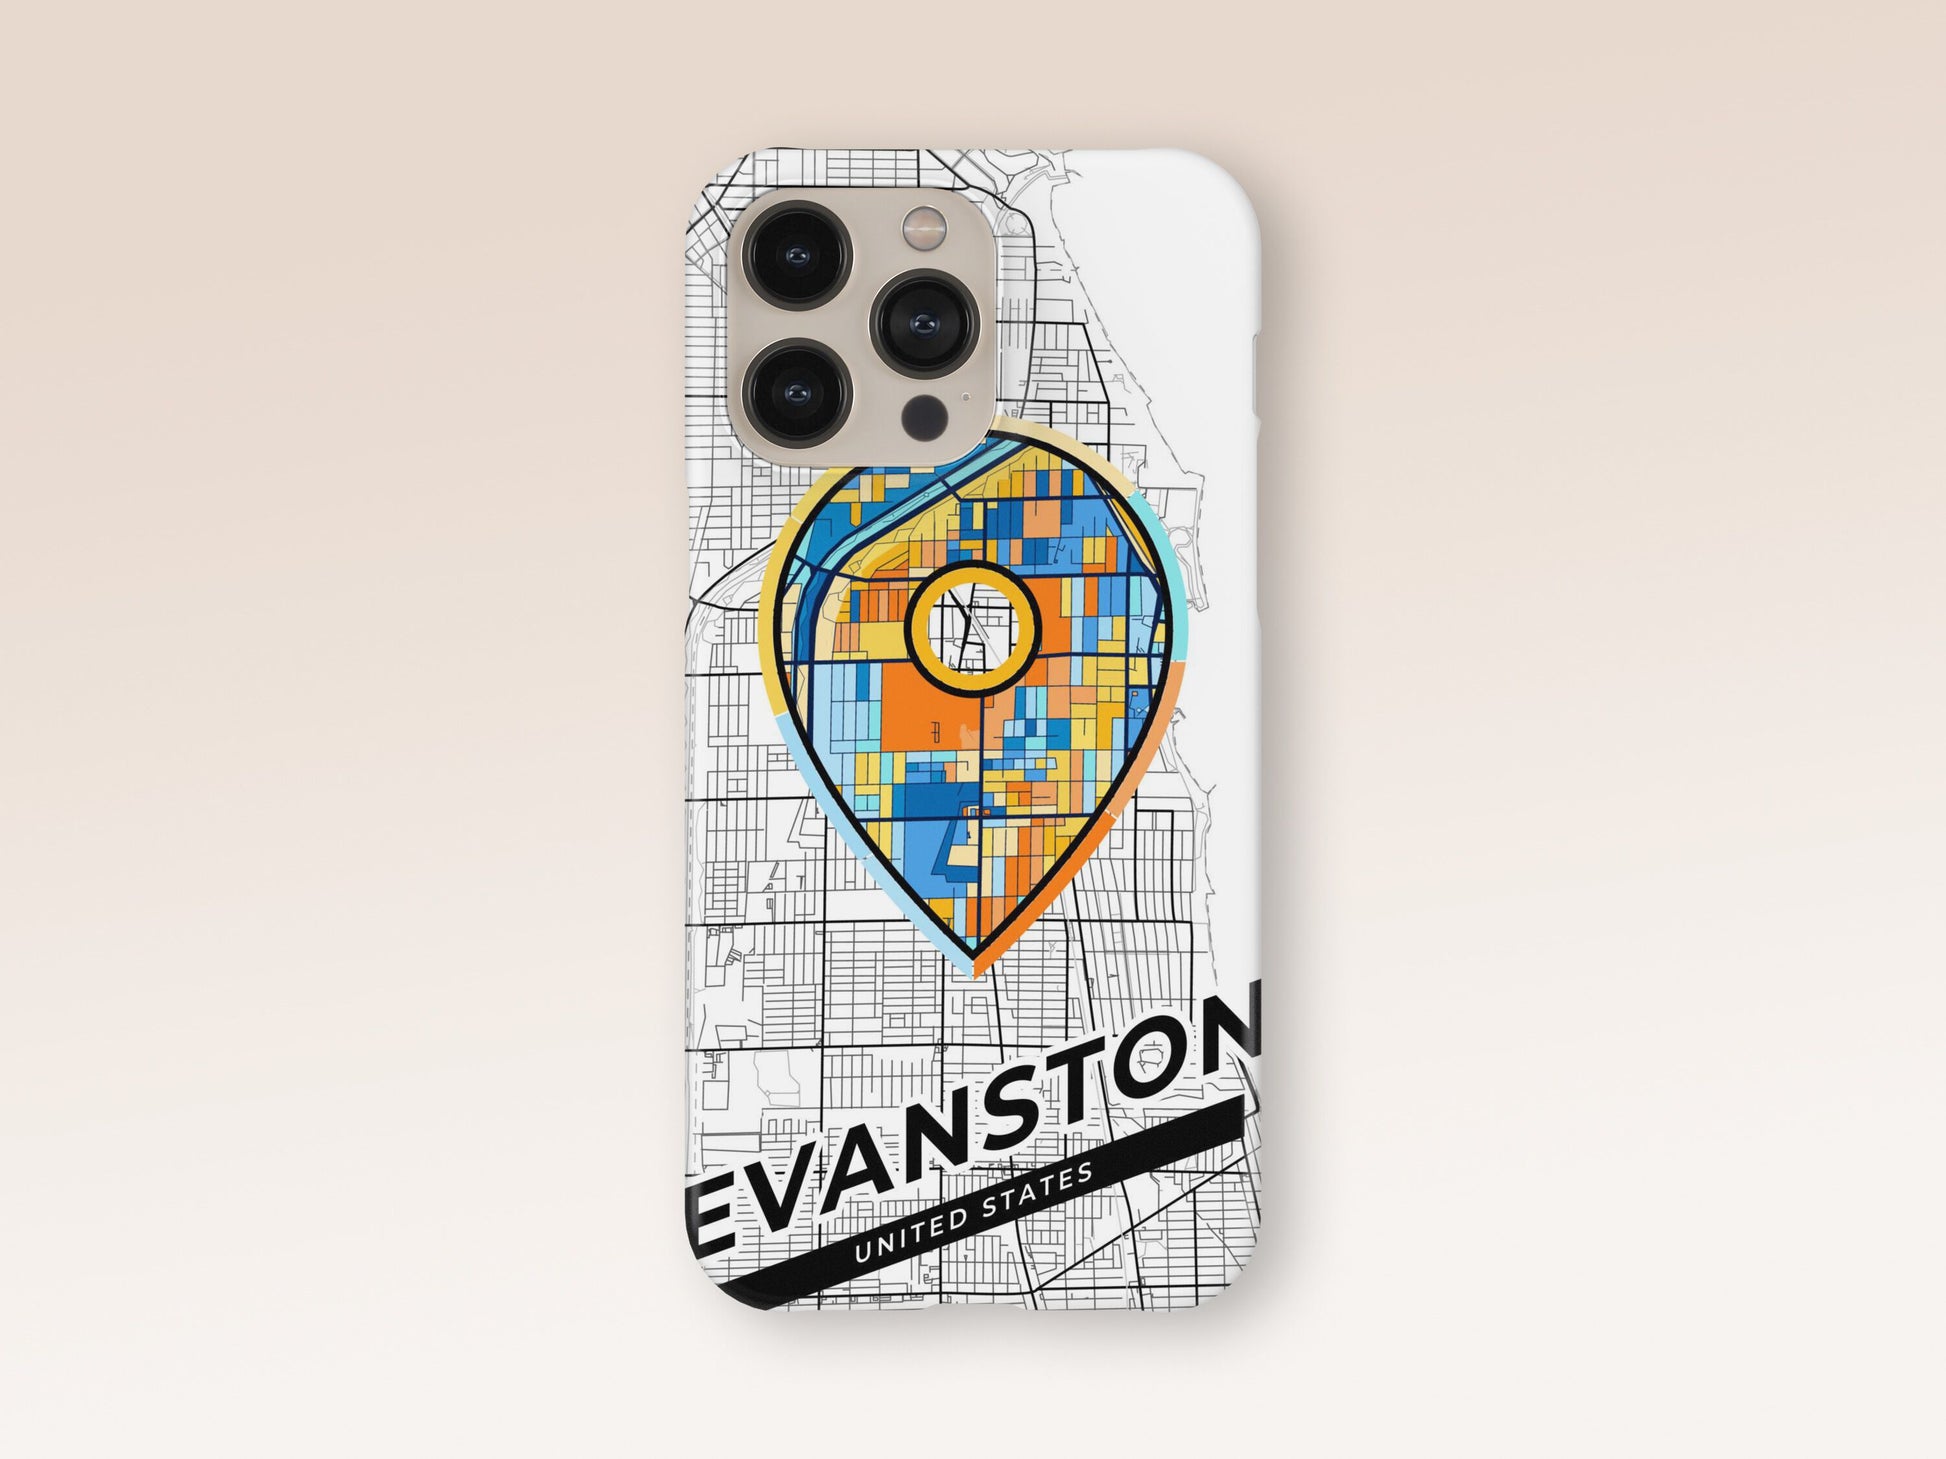 Evanston Illinois slim phone case with colorful icon. Birthday, wedding or housewarming gift. Couple match cases. 1